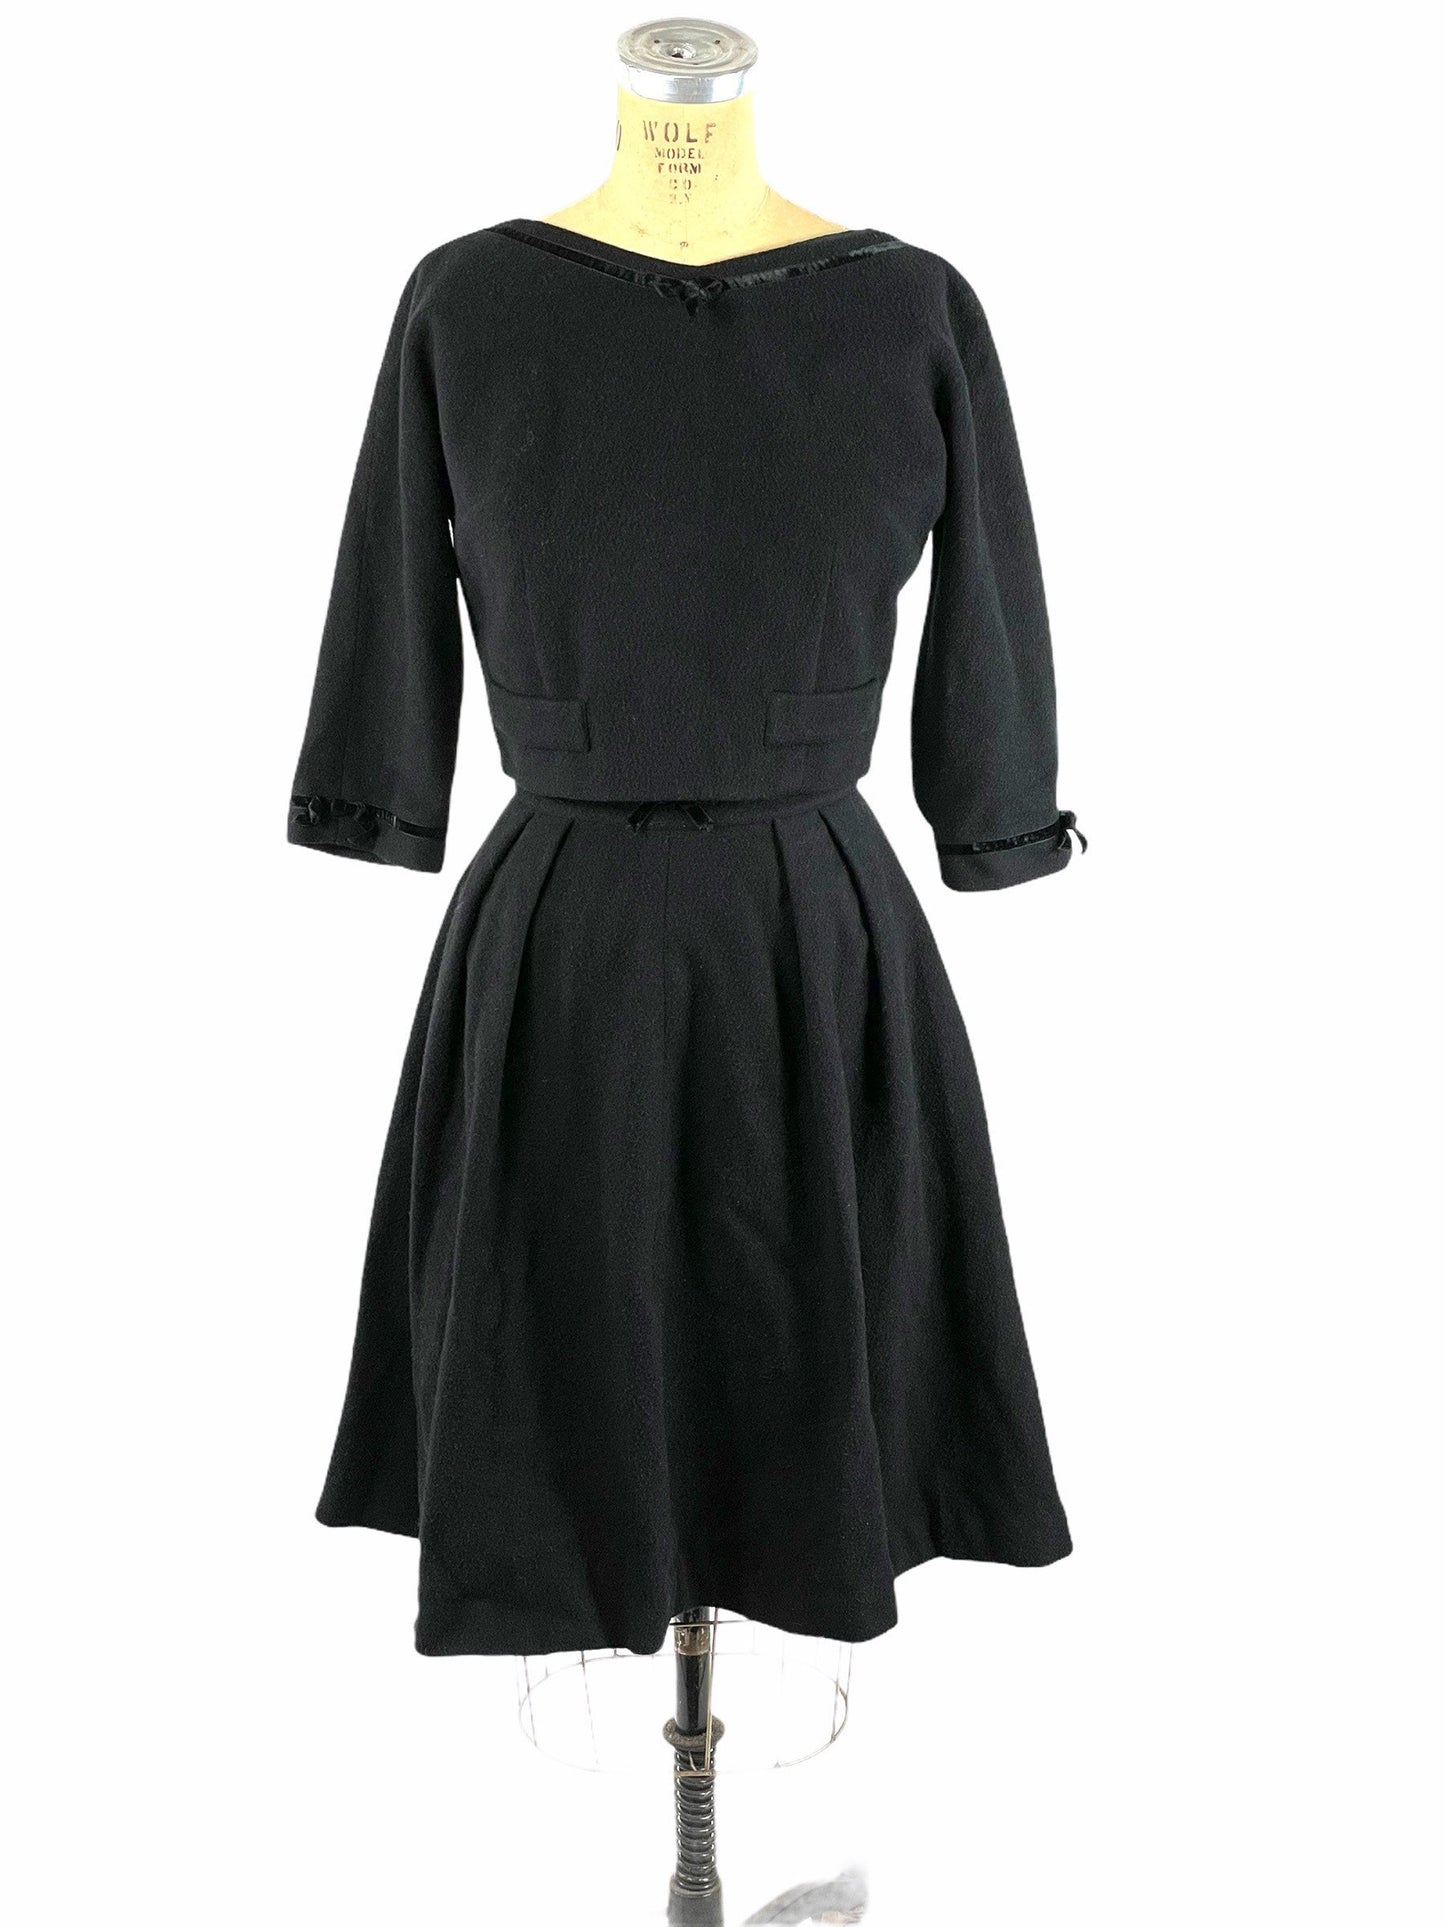 1960s black wool two piece skirt and crop top by Bobbie Brooks Size S/M